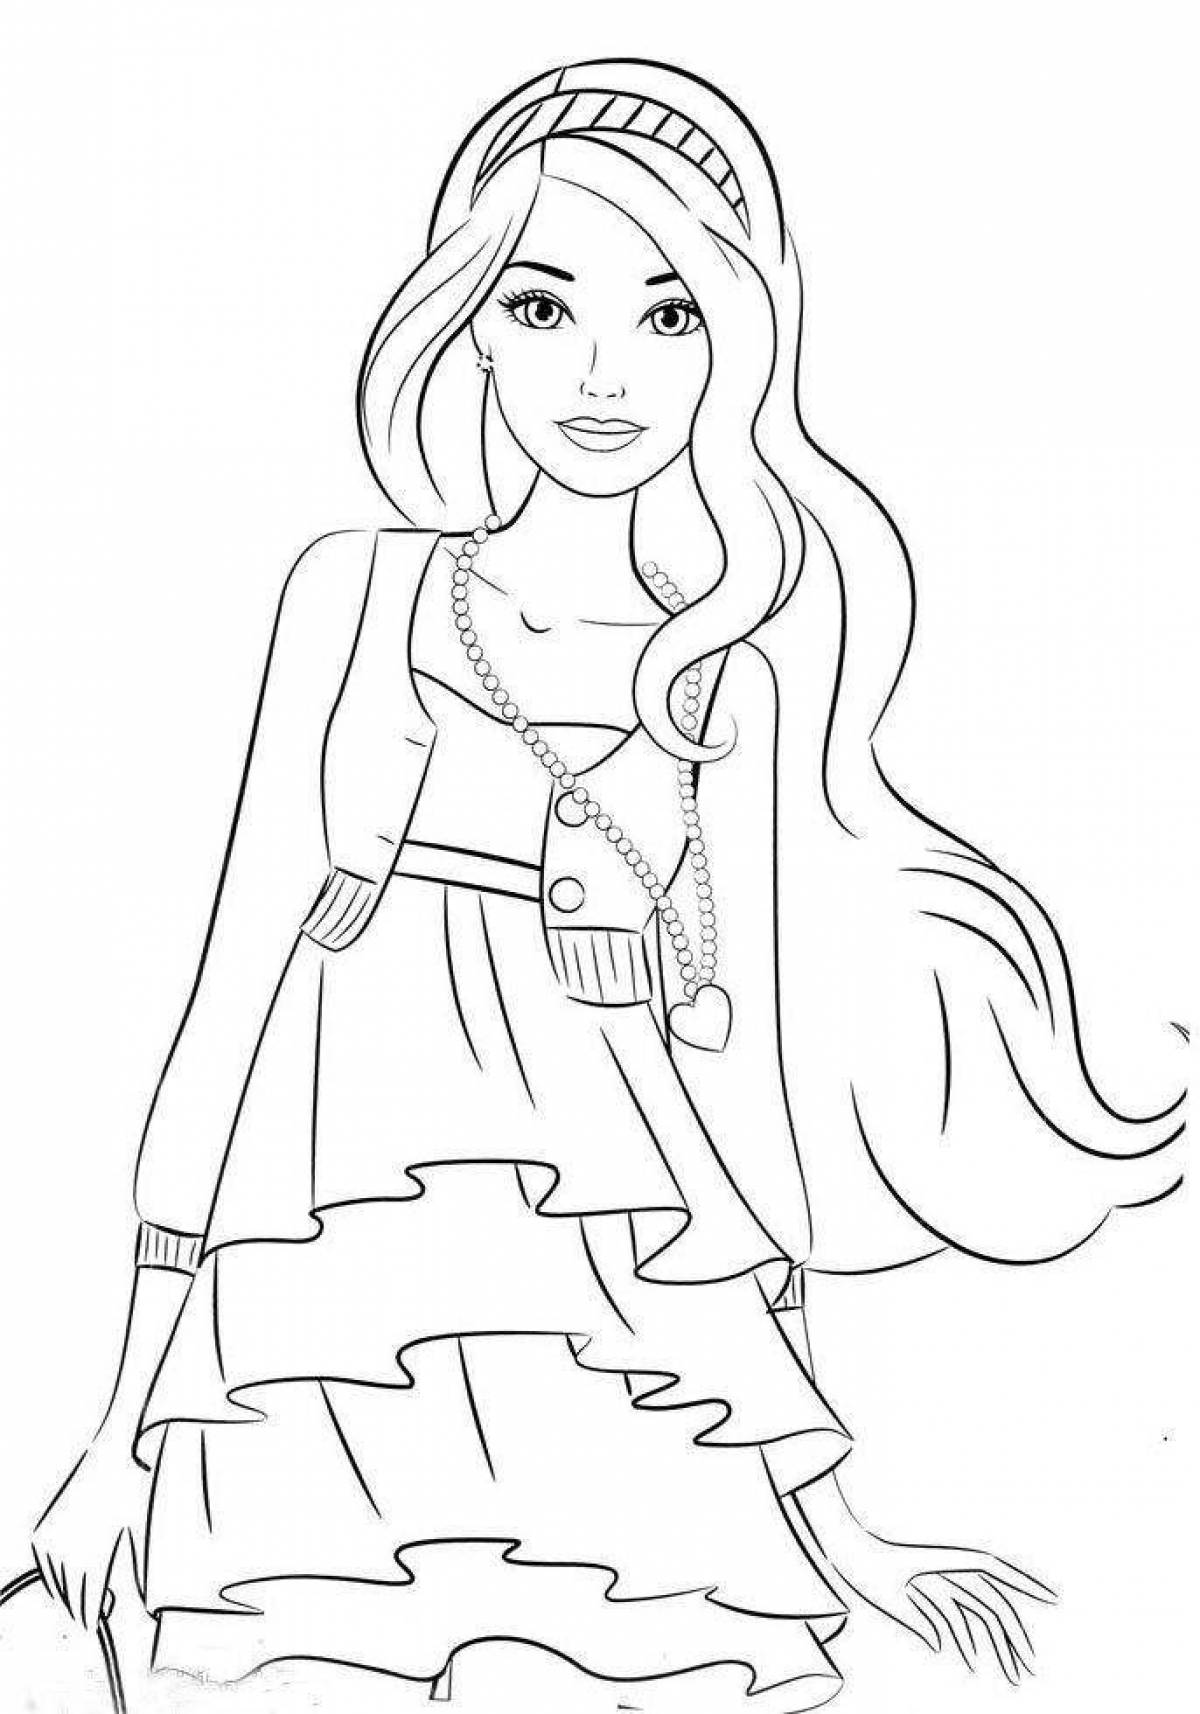 Colorful barbie doll coloring book for kids